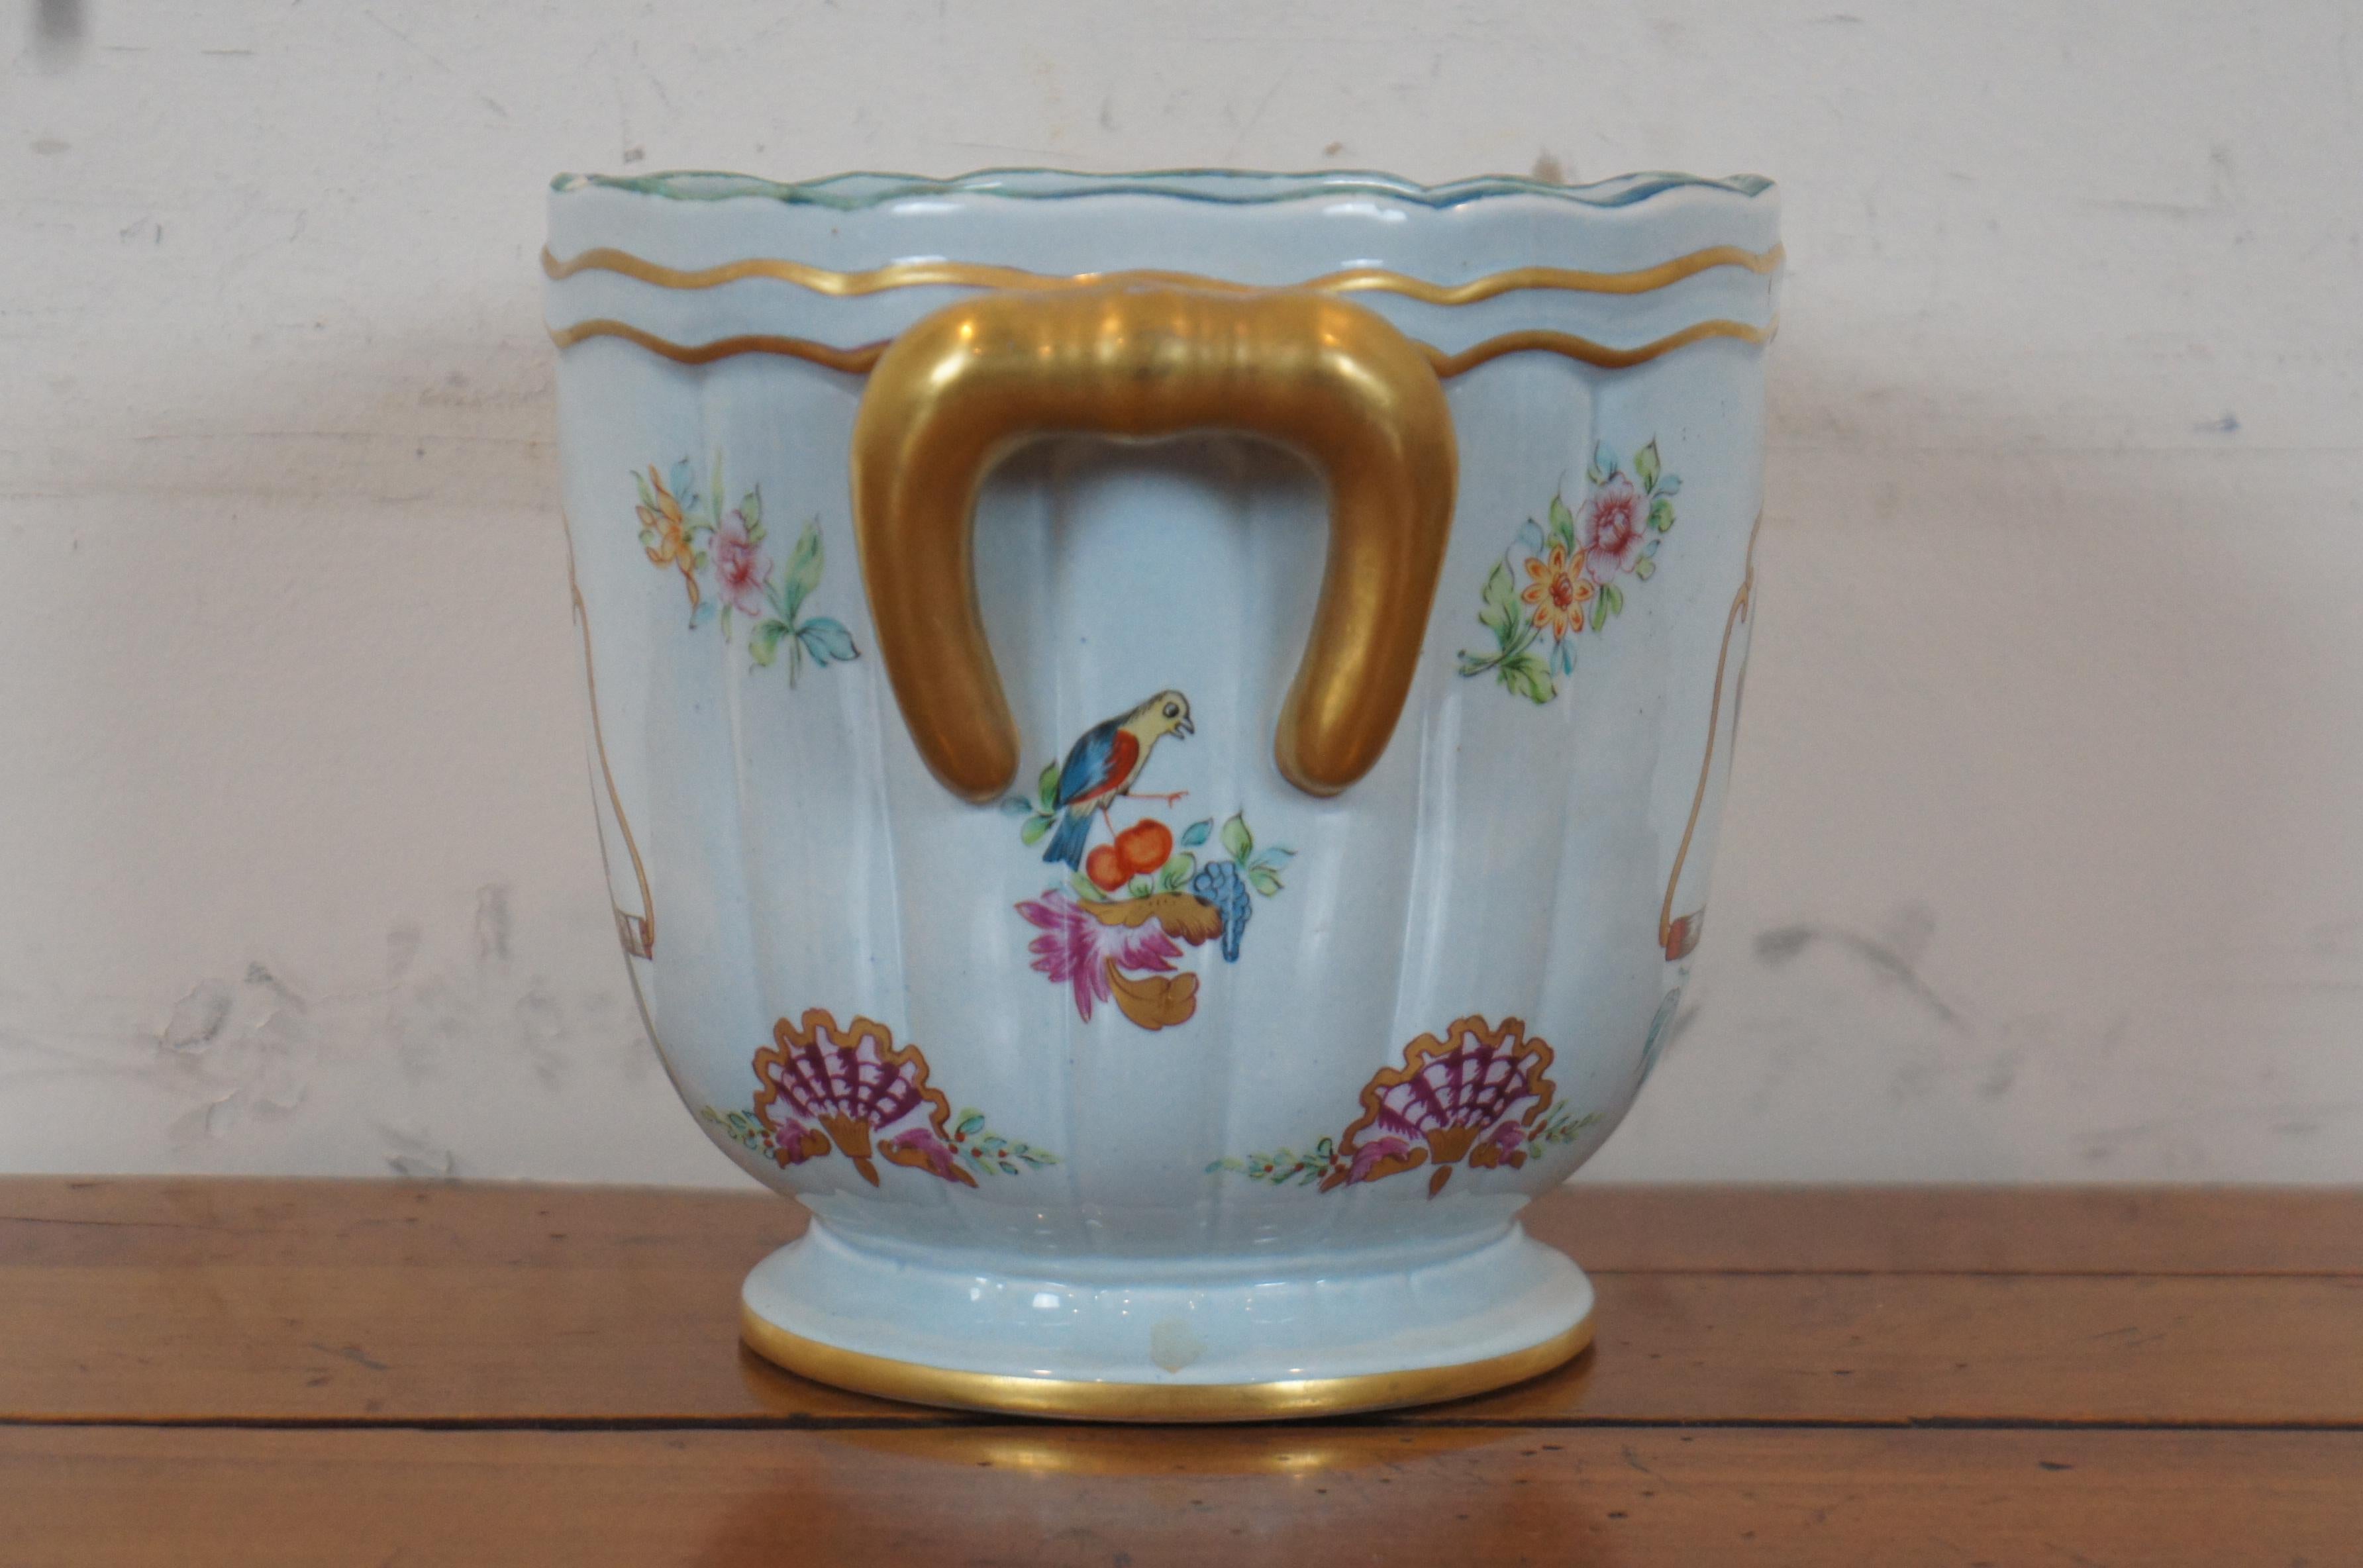 Italian Lowestoft Reproduction Mottahedeh Parrot Bird Cache Pot Vase Planter In Good Condition For Sale In Dayton, OH